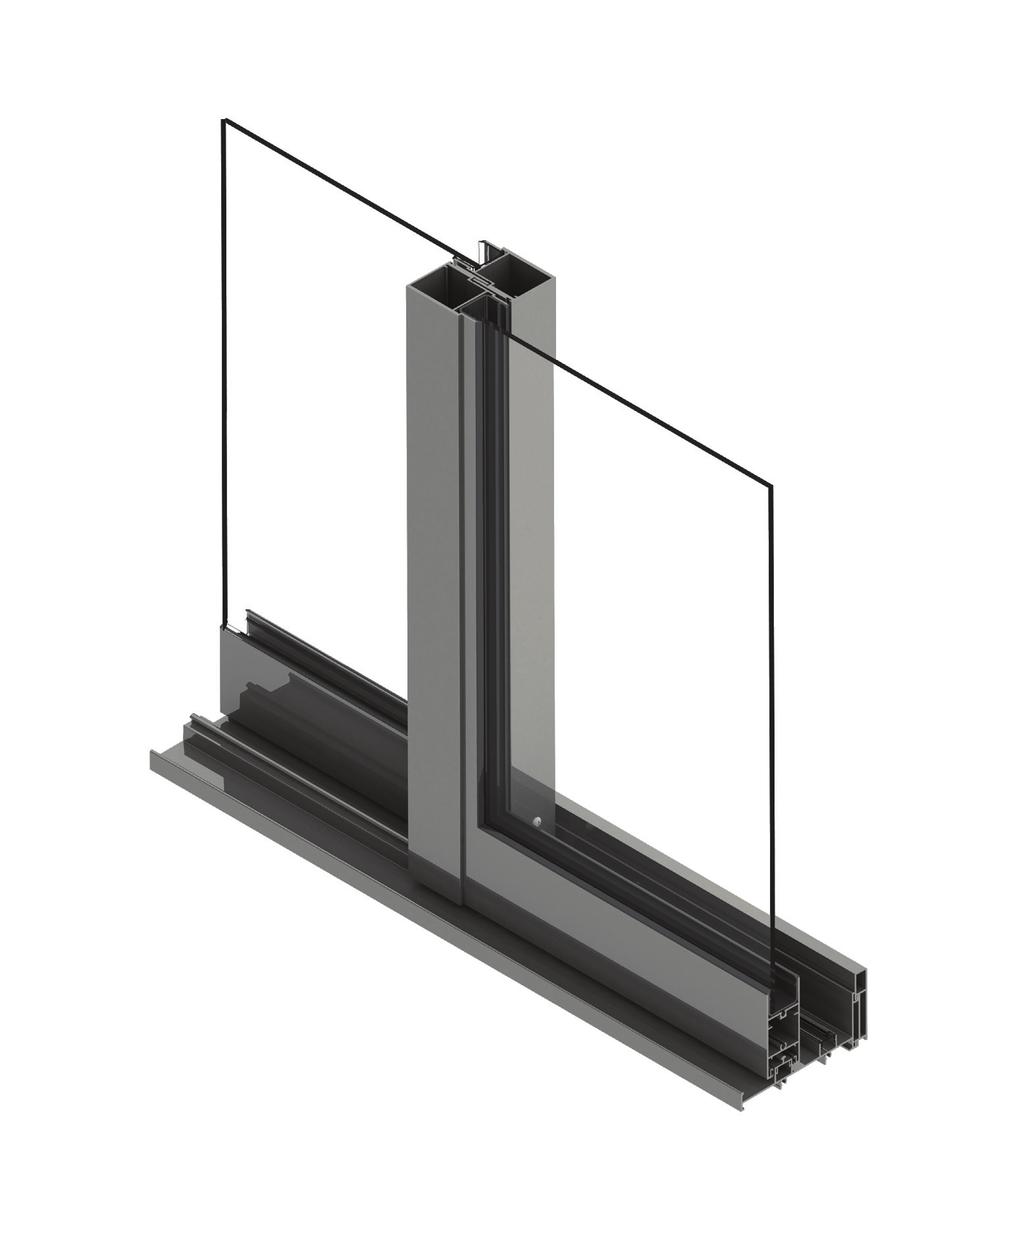 EL-400 The EL-400 is a sliding glass door with a 4 9/16 frame profile.